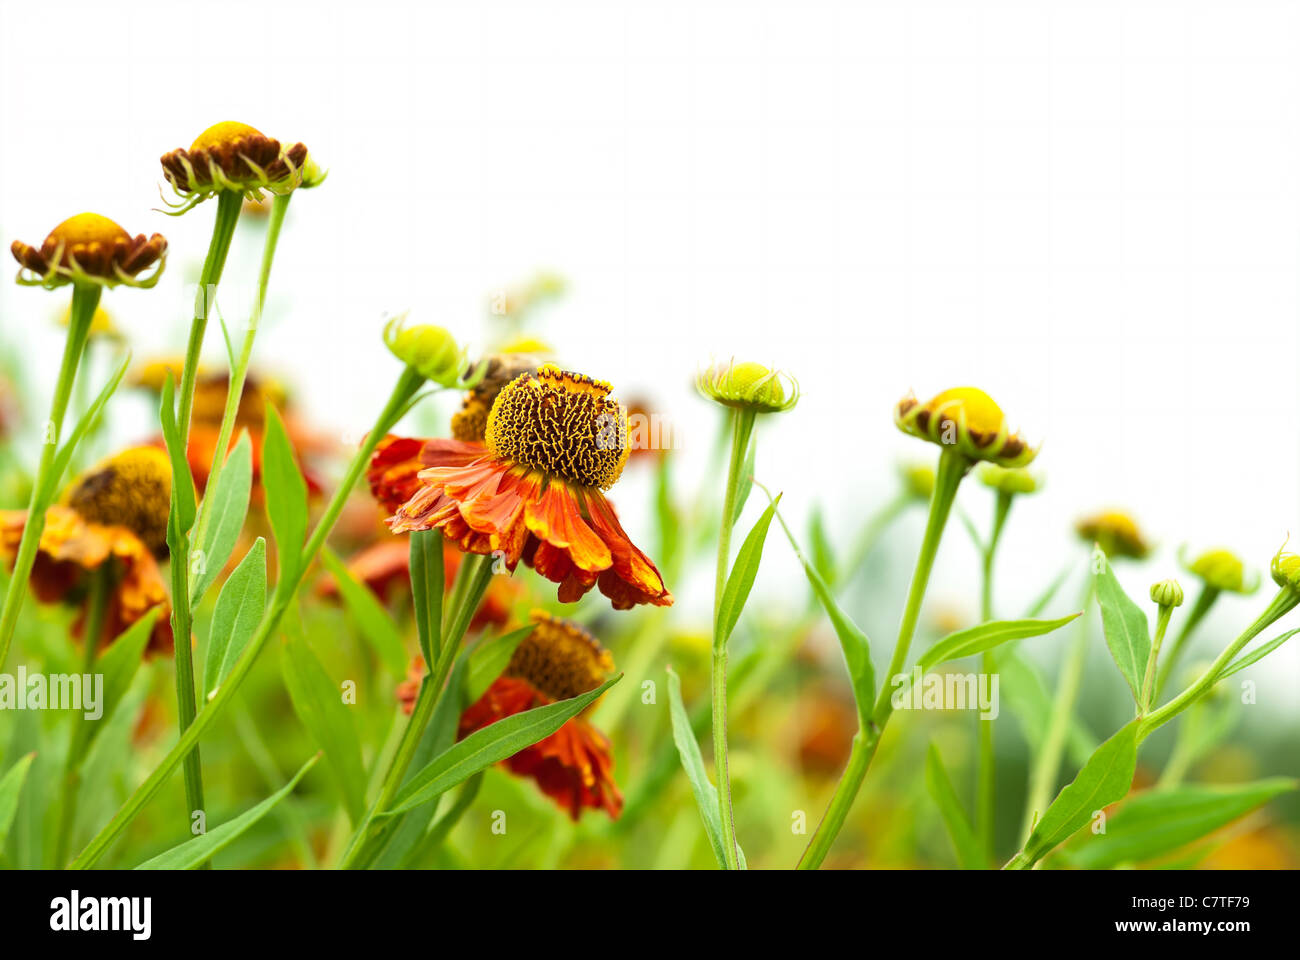 Blooming Helenium isolated on white Banque D'Images